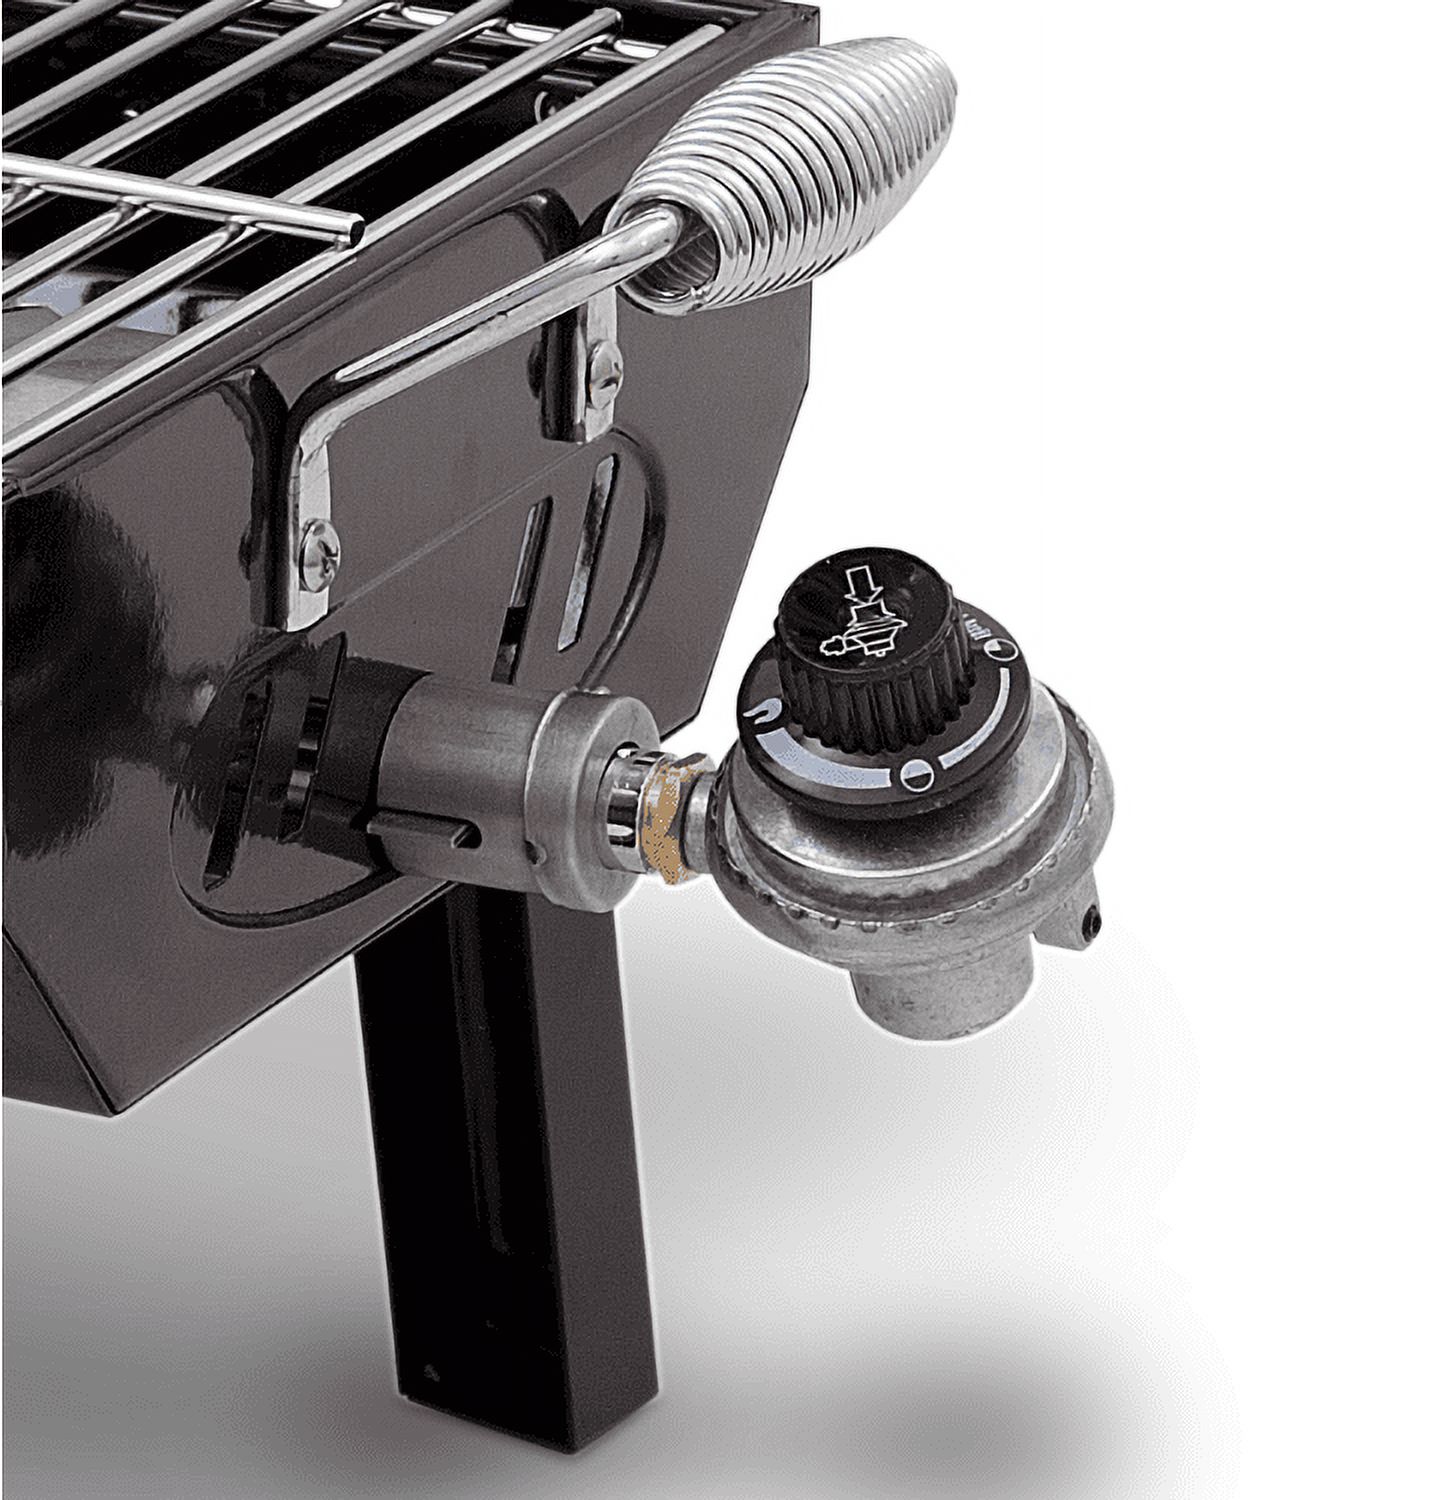 Char-Broil 200 Liquid Propane, (LP), Portable Stainless Steel Gas Grill - image 4 of 8